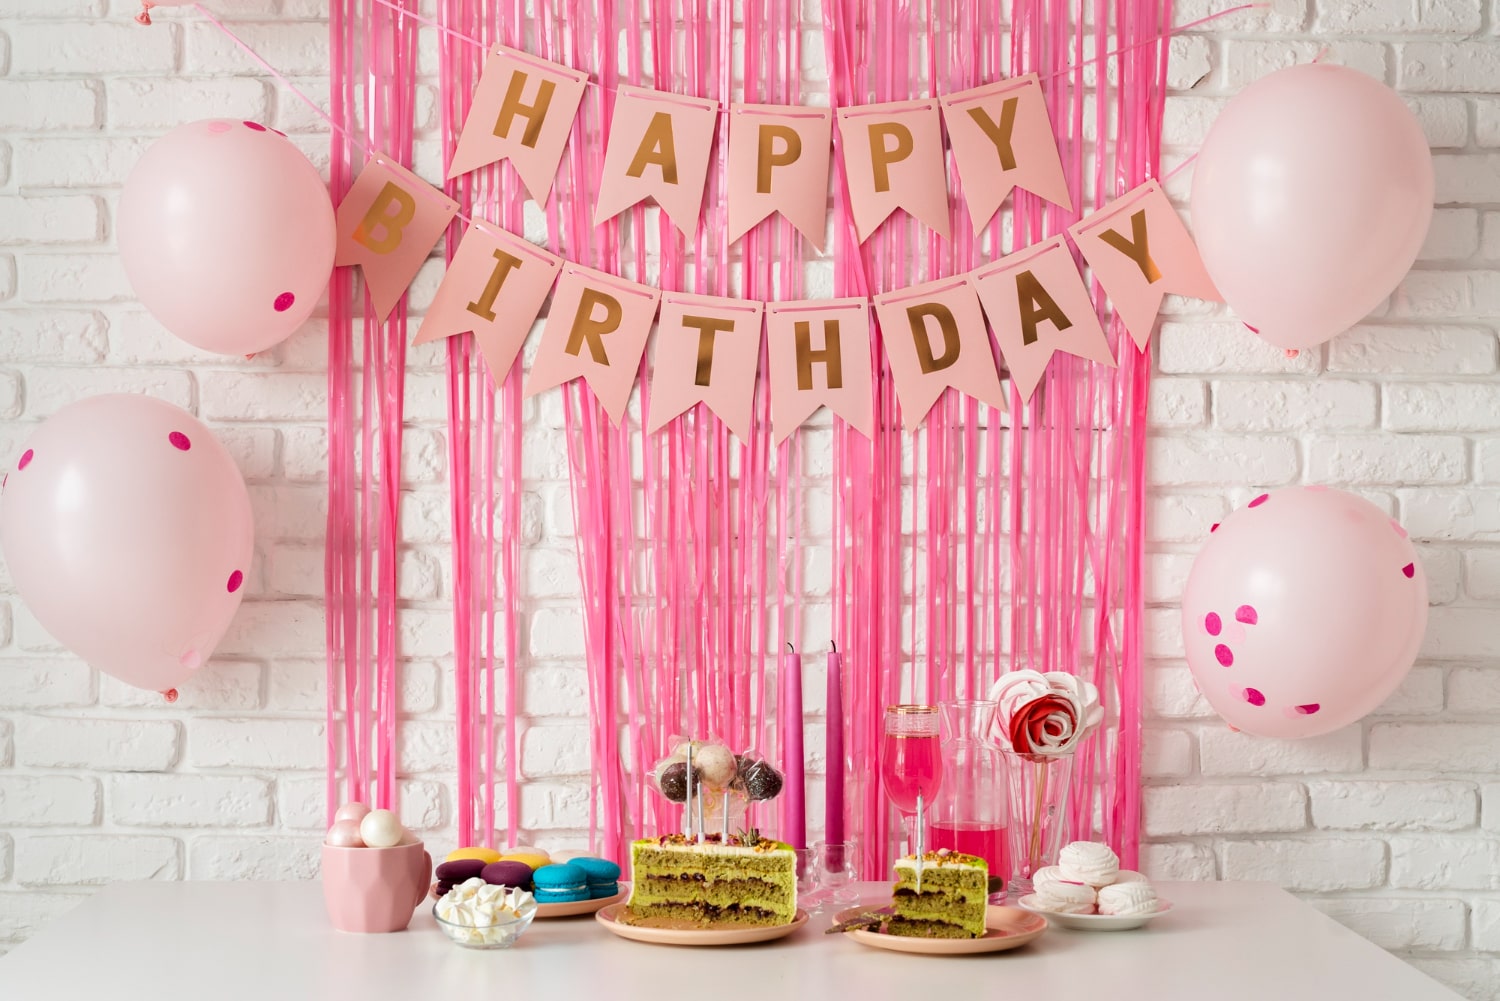 Top birthday decoration ideas at home